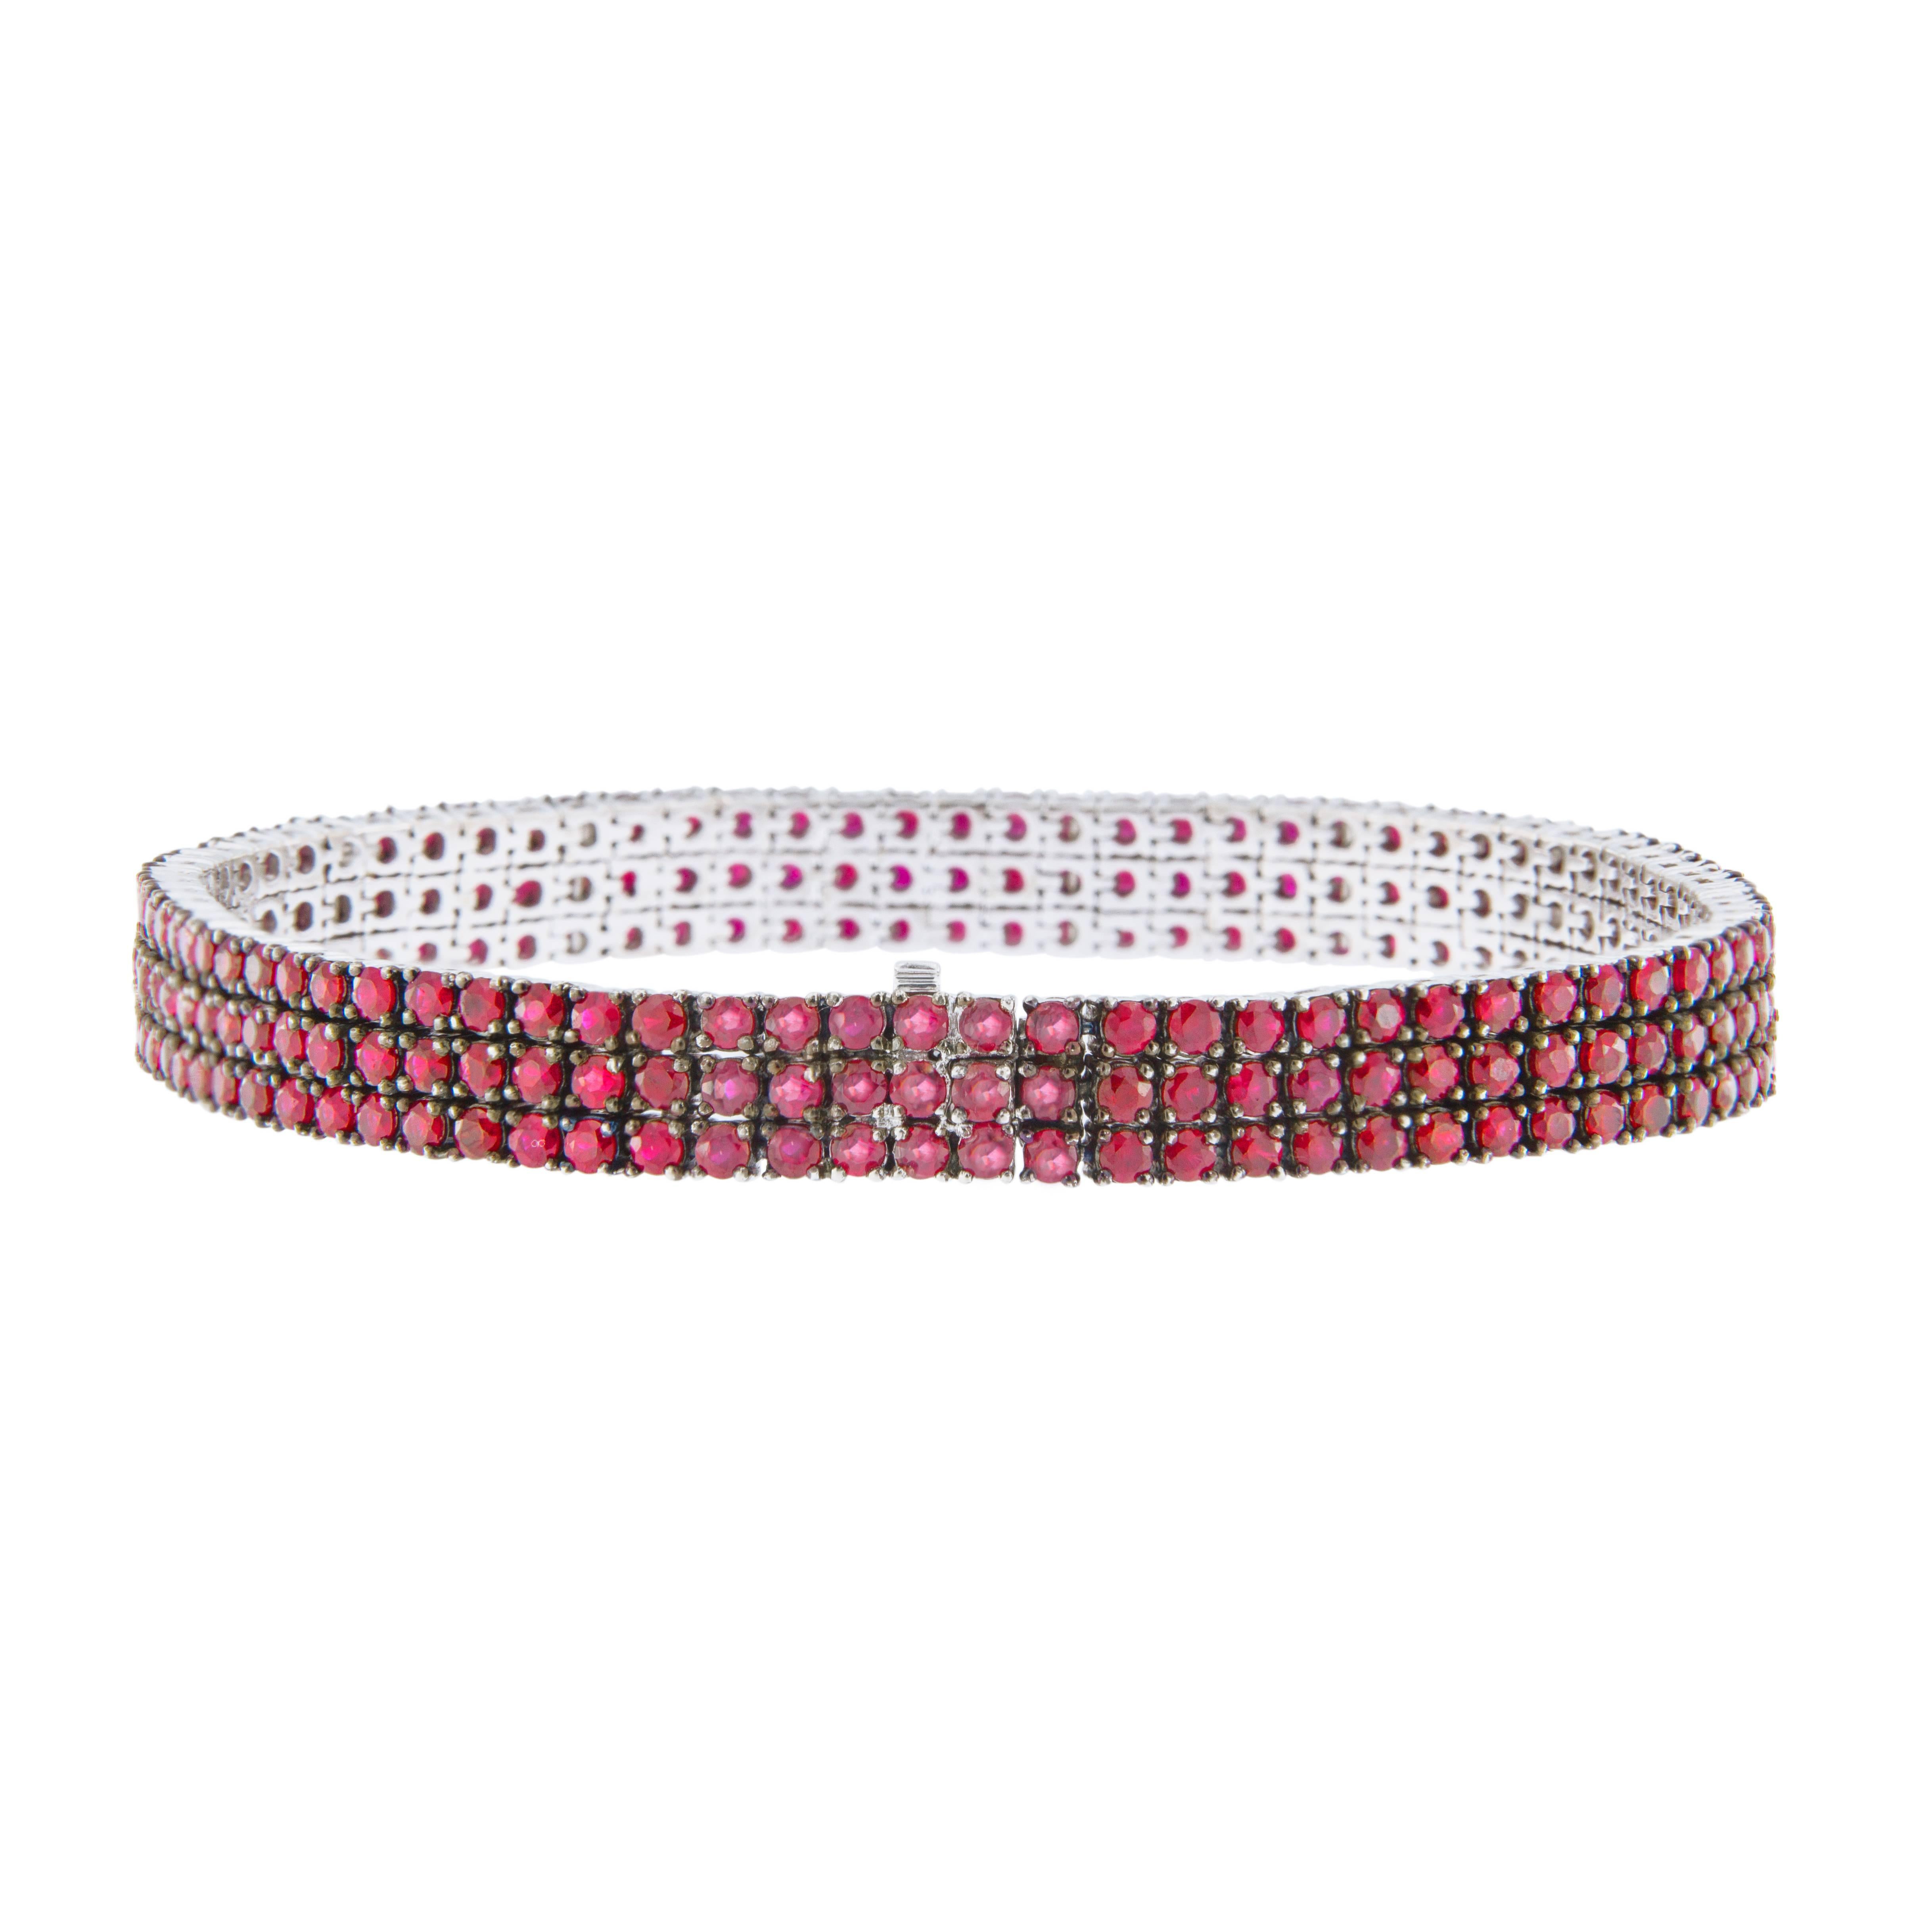 Jona design collection, 18 karat white gold, hand crafted in Italy, three row tennis bracelet set with 9.93 carats of strong, saturated color rubies. 
Dimensions: L x 19 cm, W x 1 cm / L x7.48 in, W x 0.39 in.
All Jona jewelry is new and has never